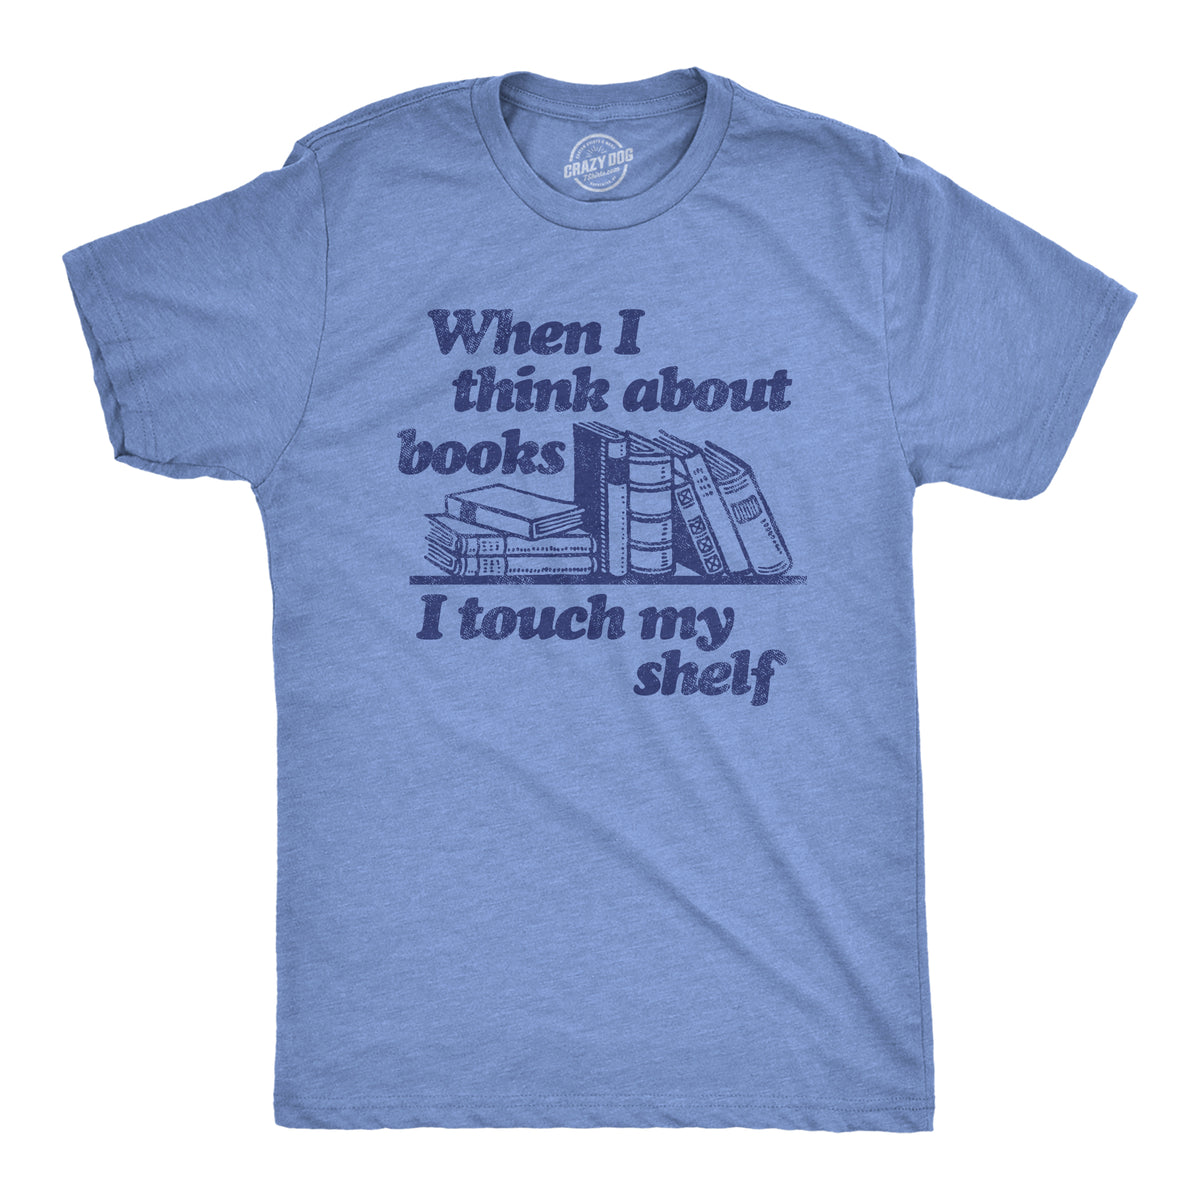 Funny Light Heather Blue When I Think About Books I Touch My Shelf Mens T Shirt Nerdy Sex Nerdy Tee